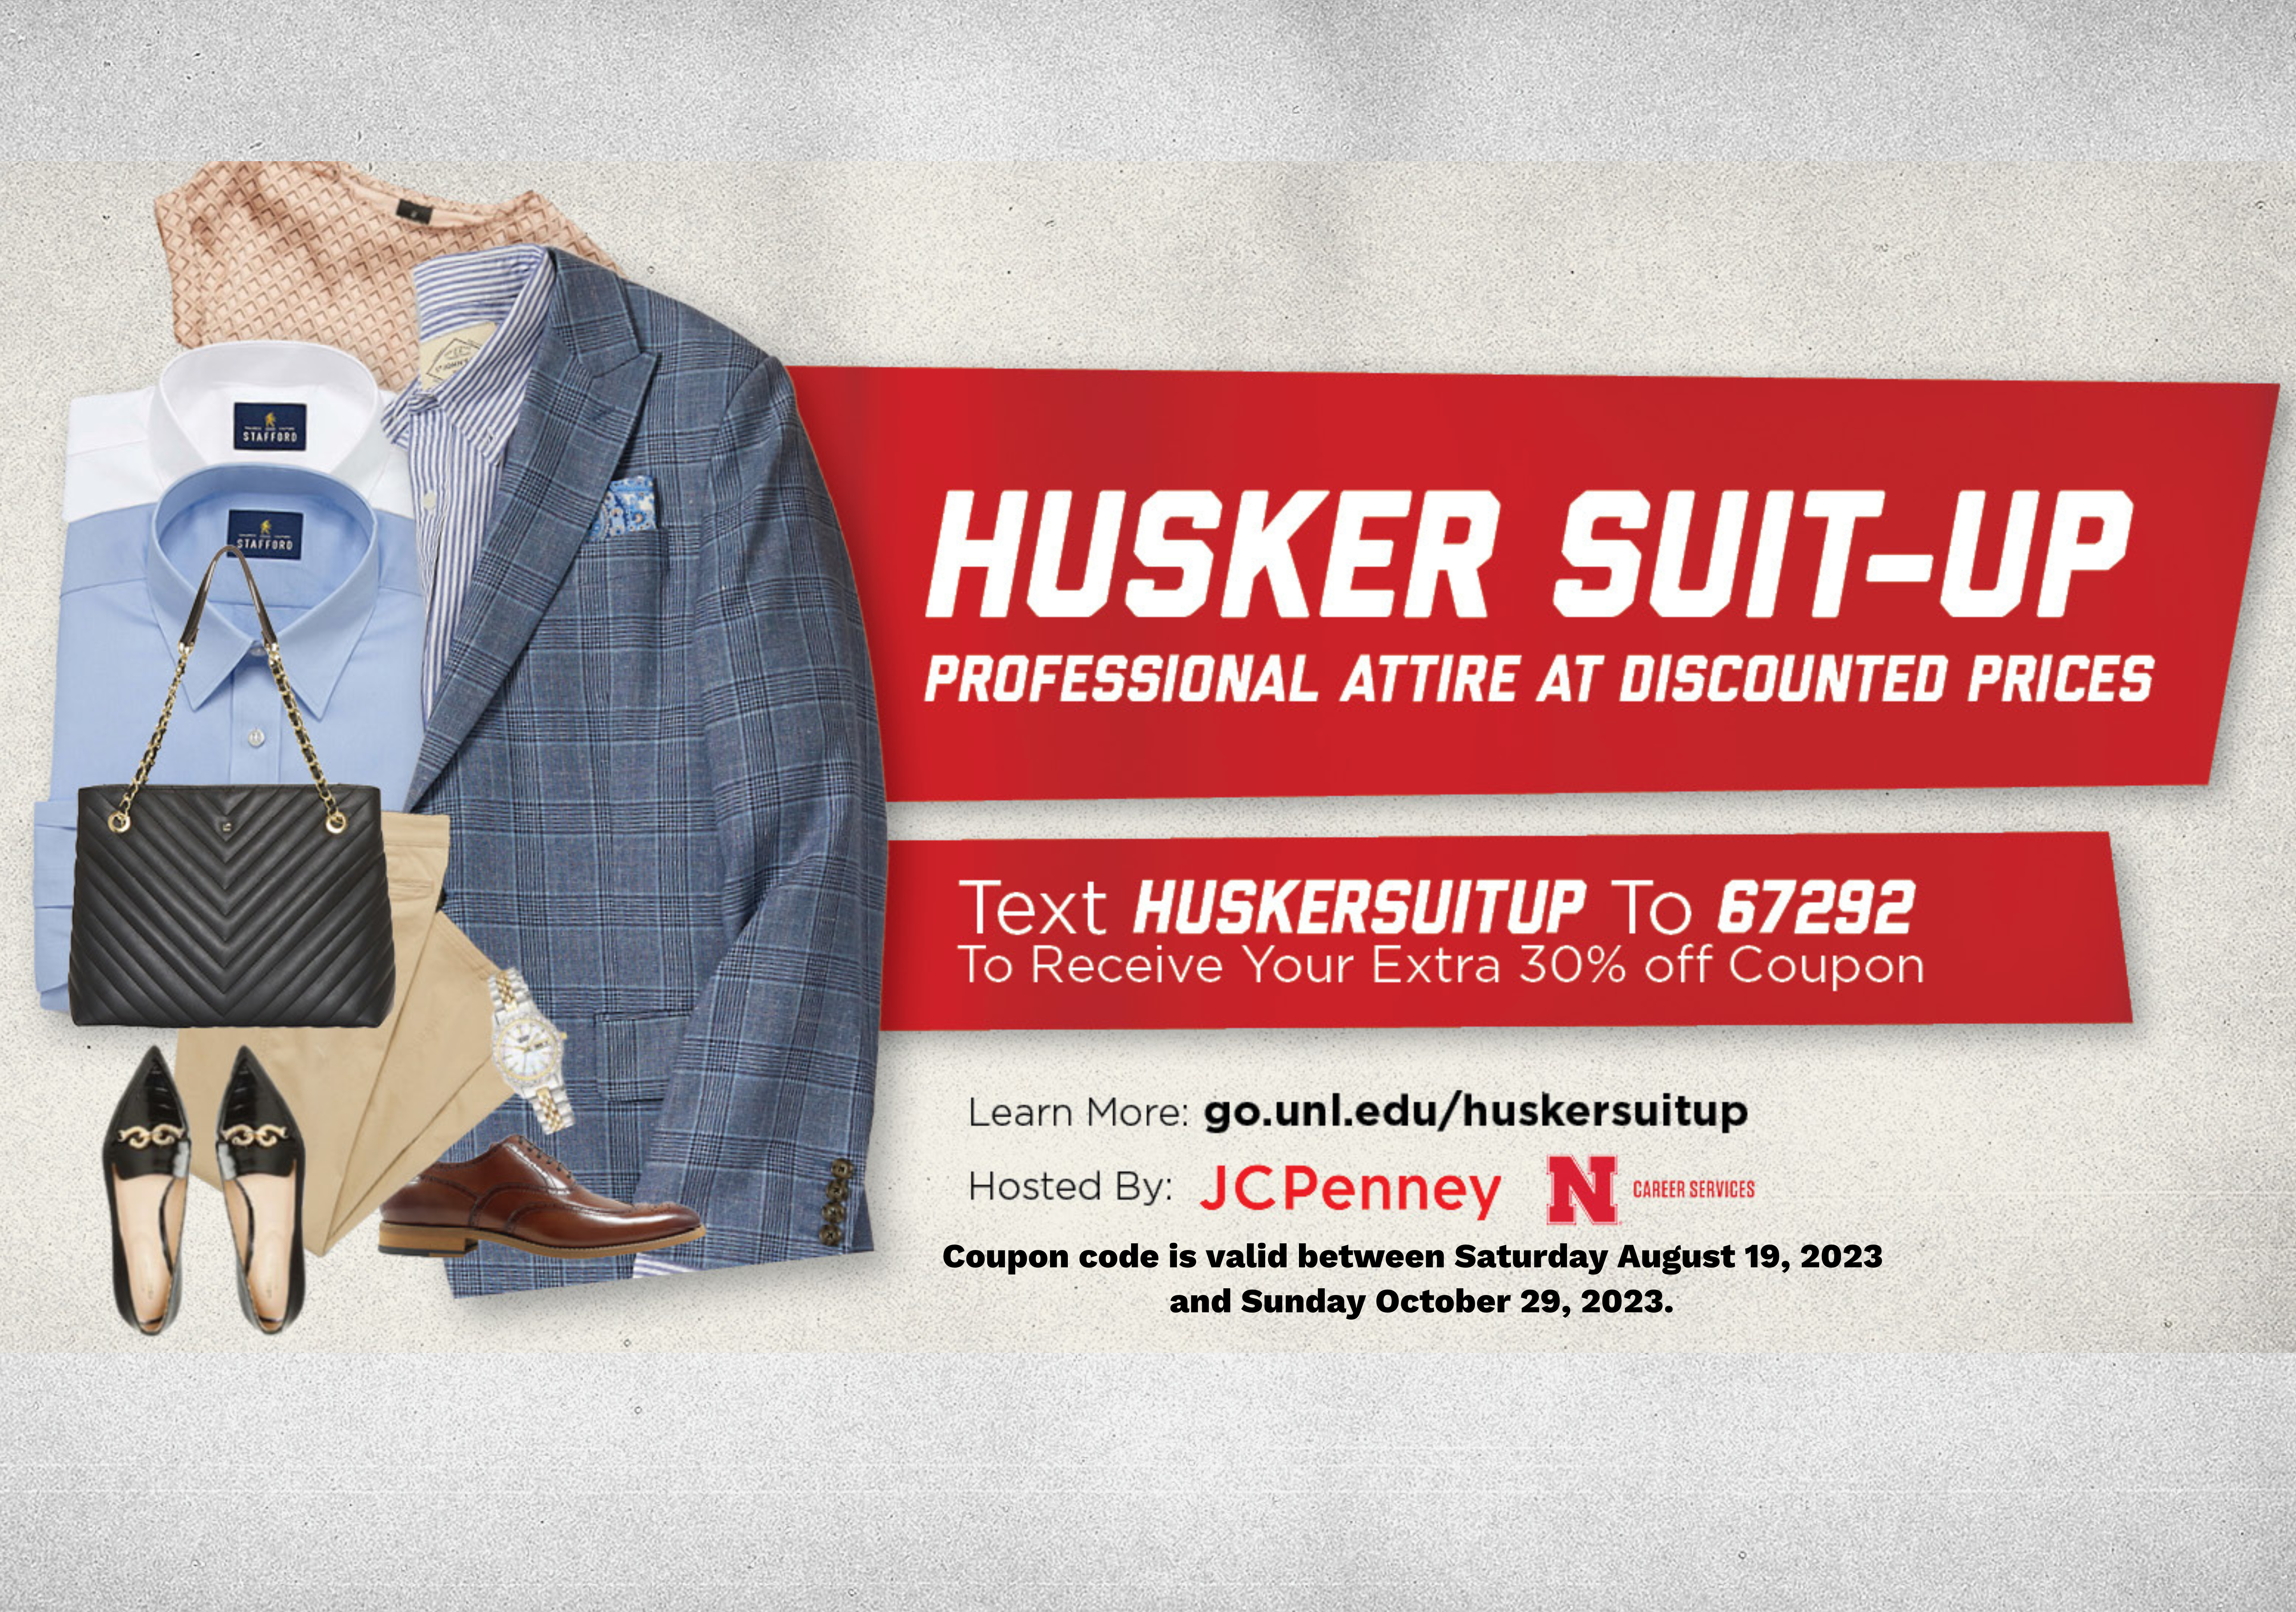 Husker Suit-Up: Professional Attire at Discounted Prices